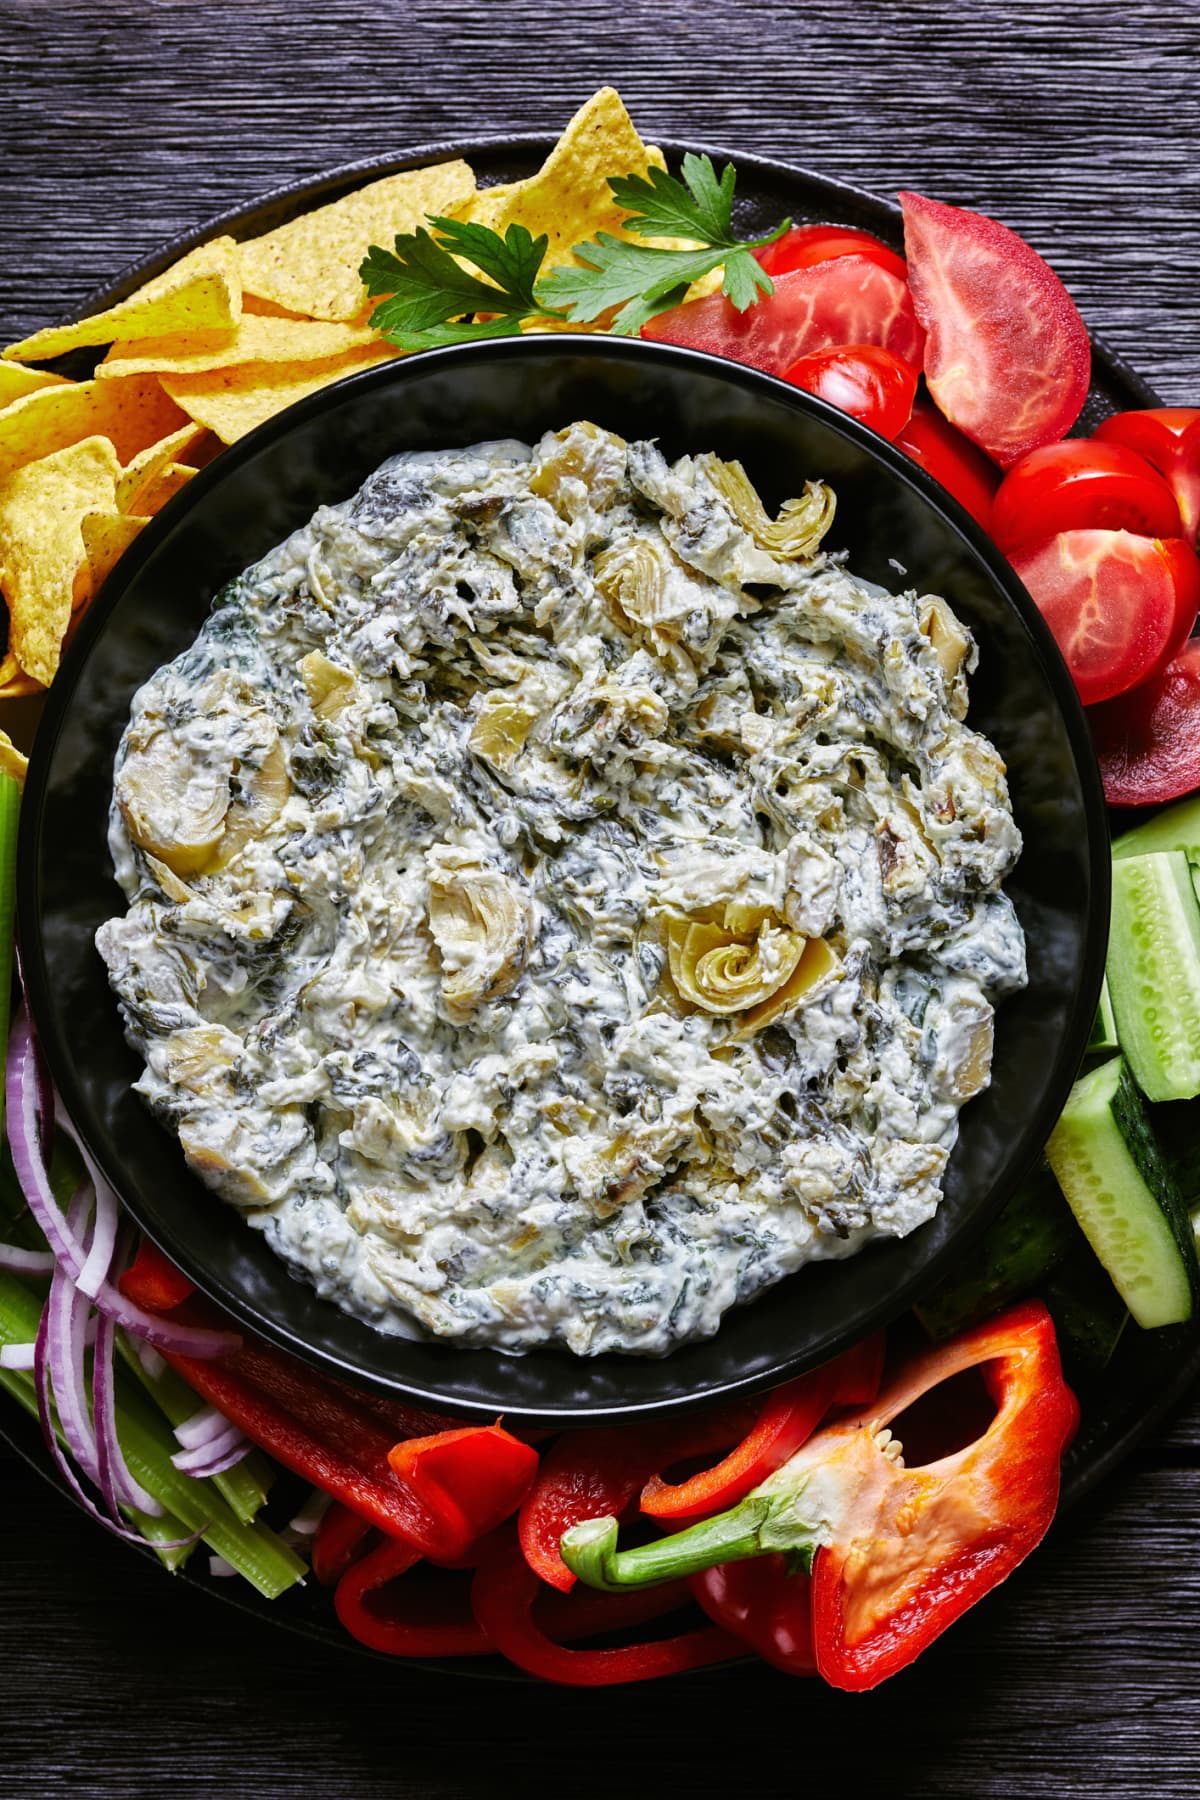 Spinach Artichoke leafy cheese dip in a bowl with tortilla chips, cucumber, celery sticks, tomato slices and red bell pepper.